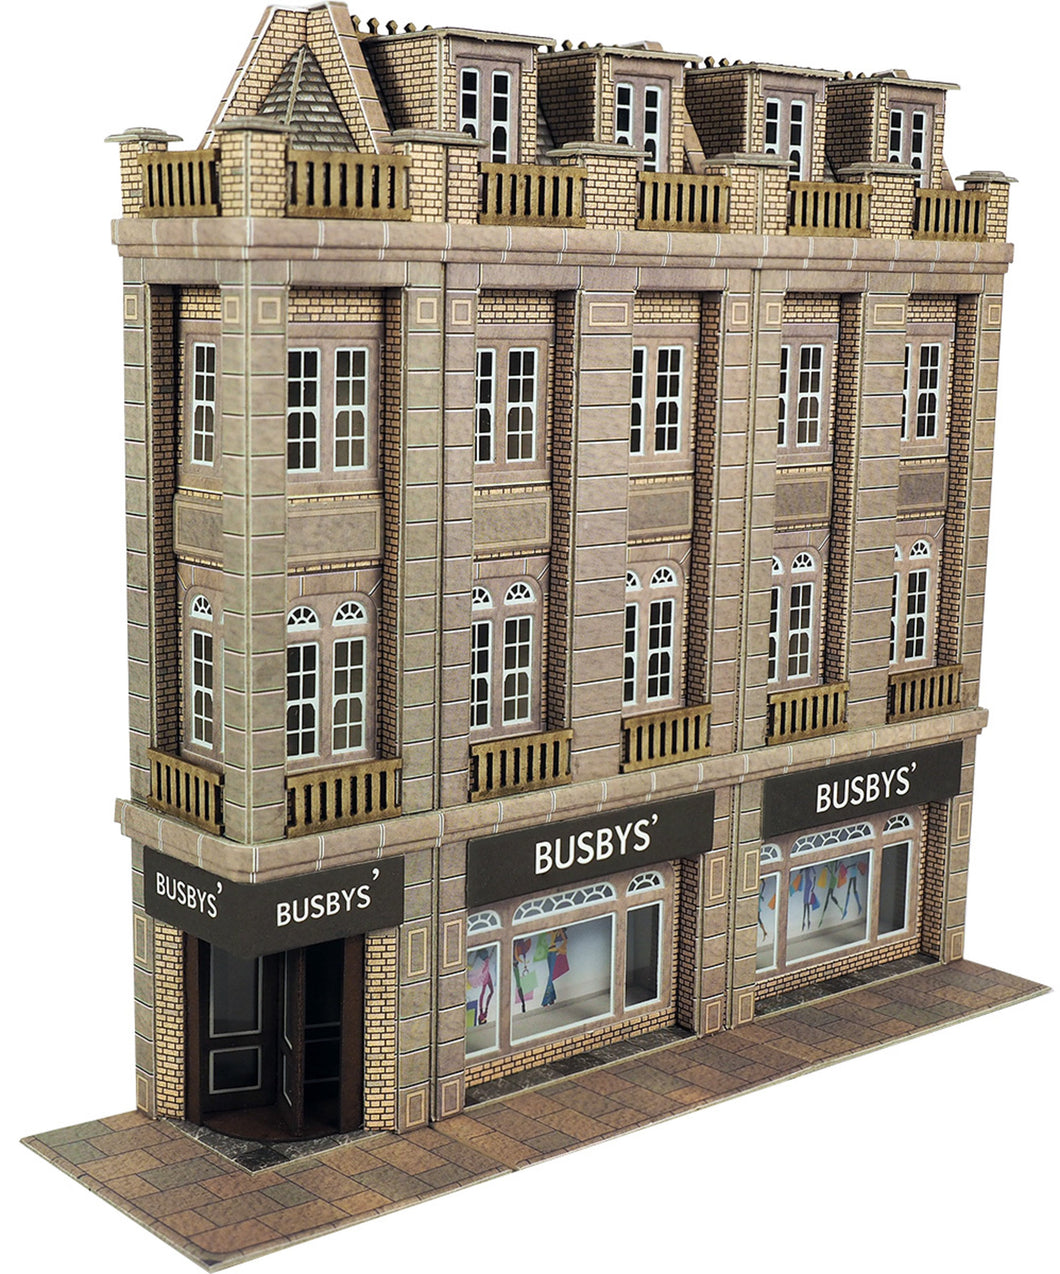 PO279 00/H0 Scale Low Relief Department Store